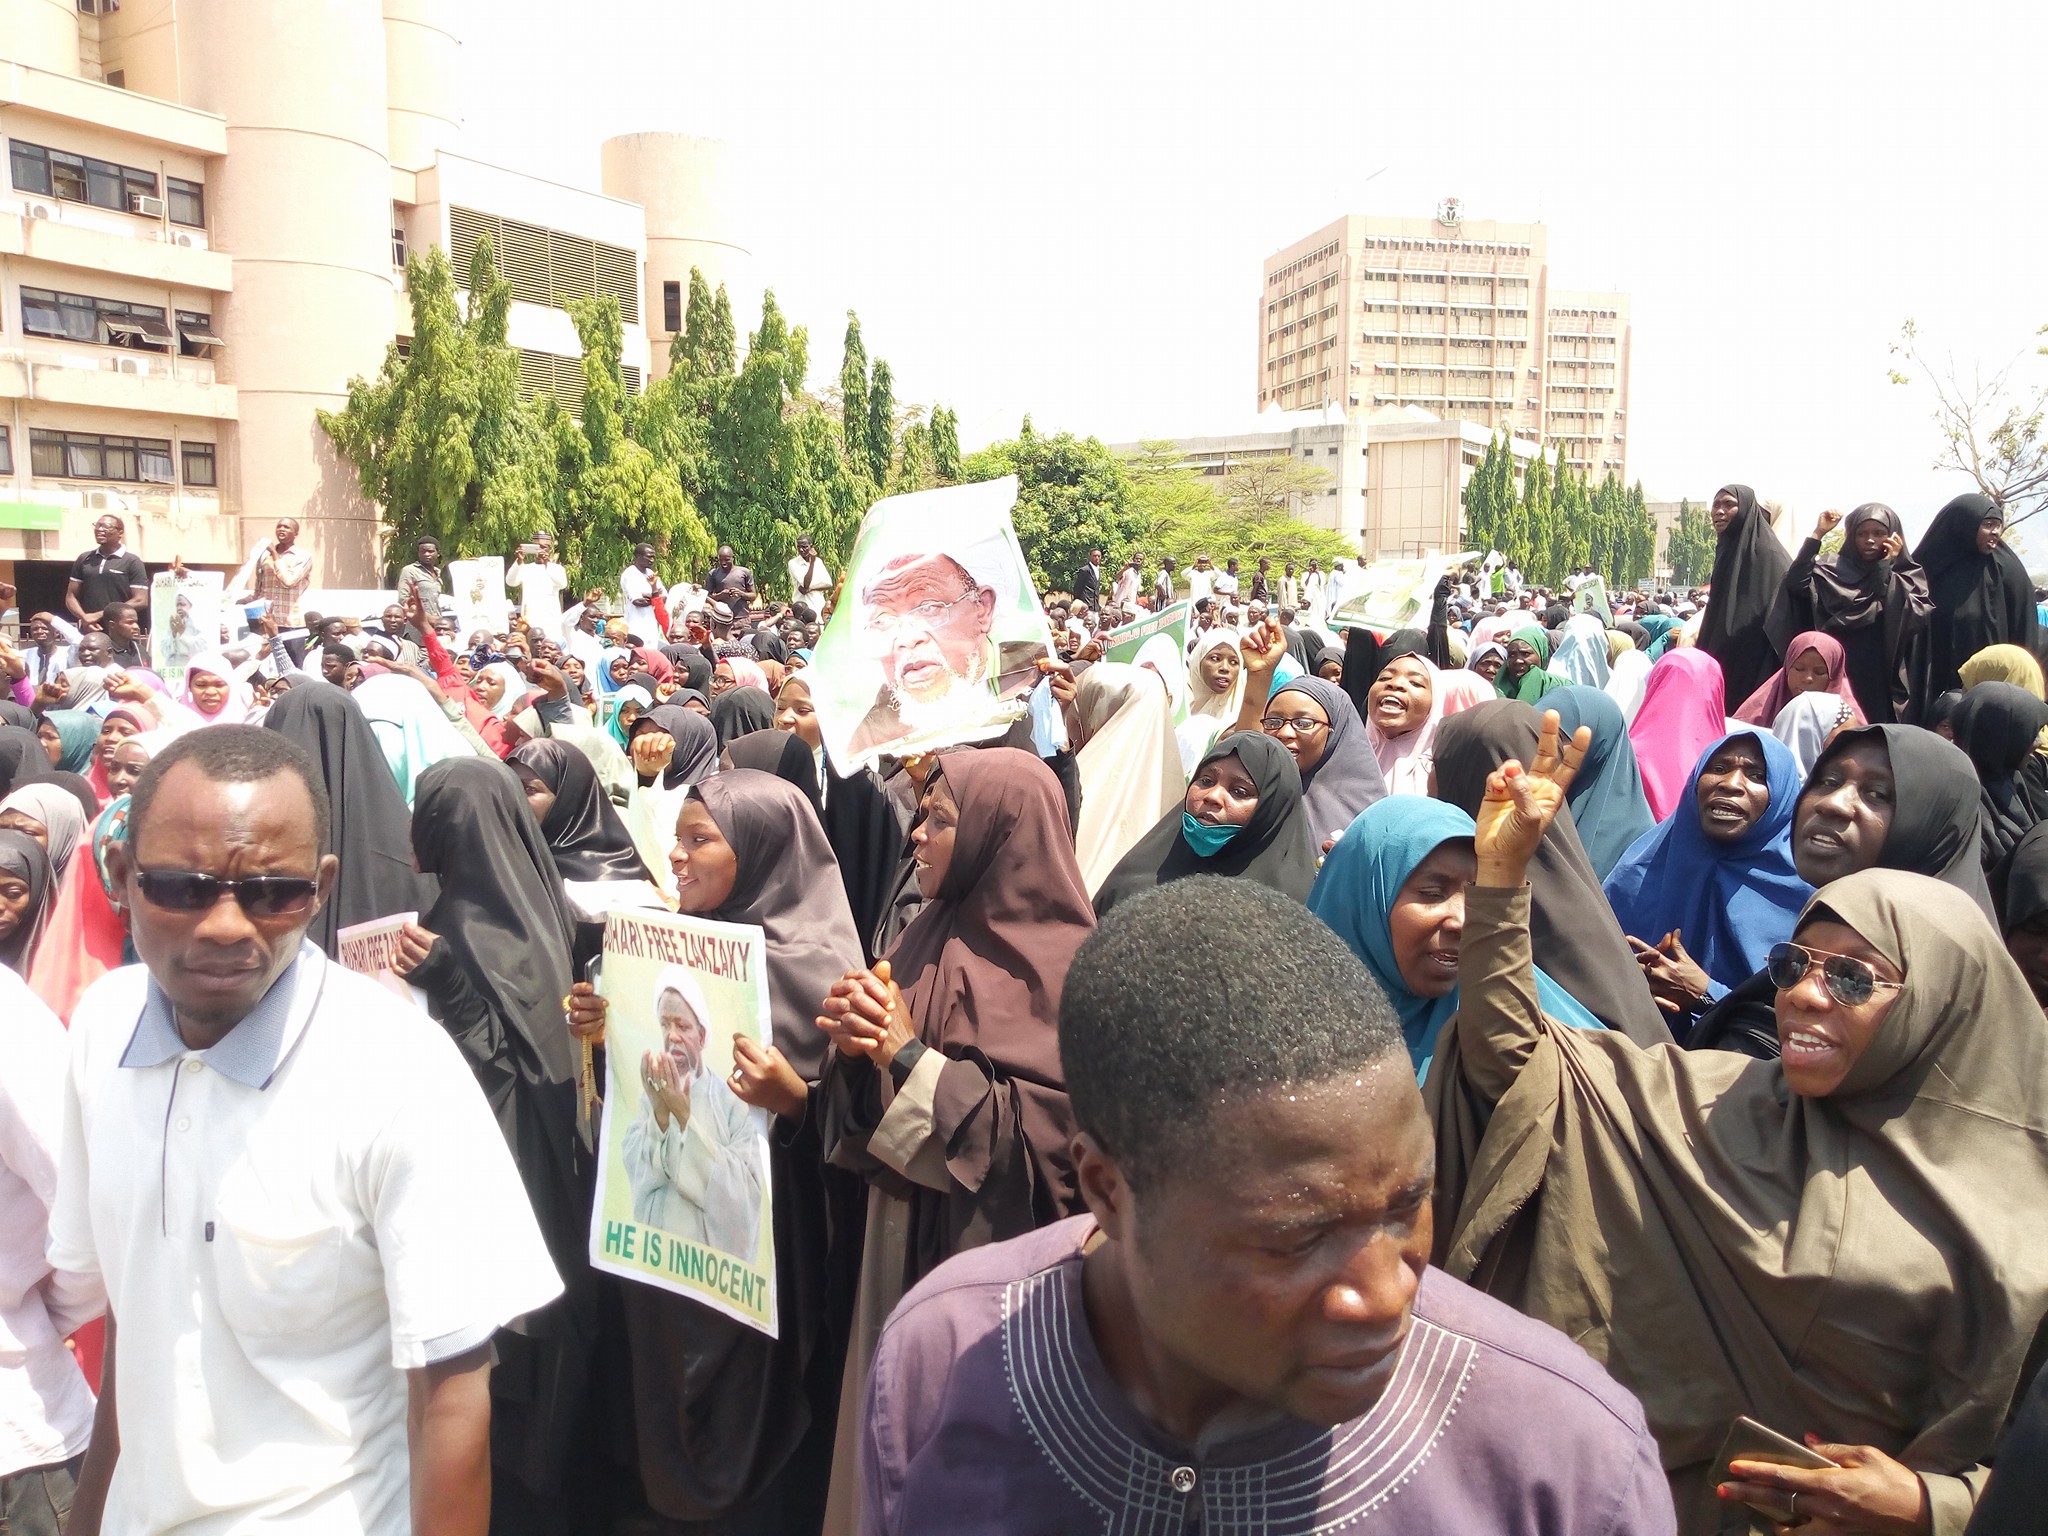  free zakzaky protest in  abuja on  7  march 